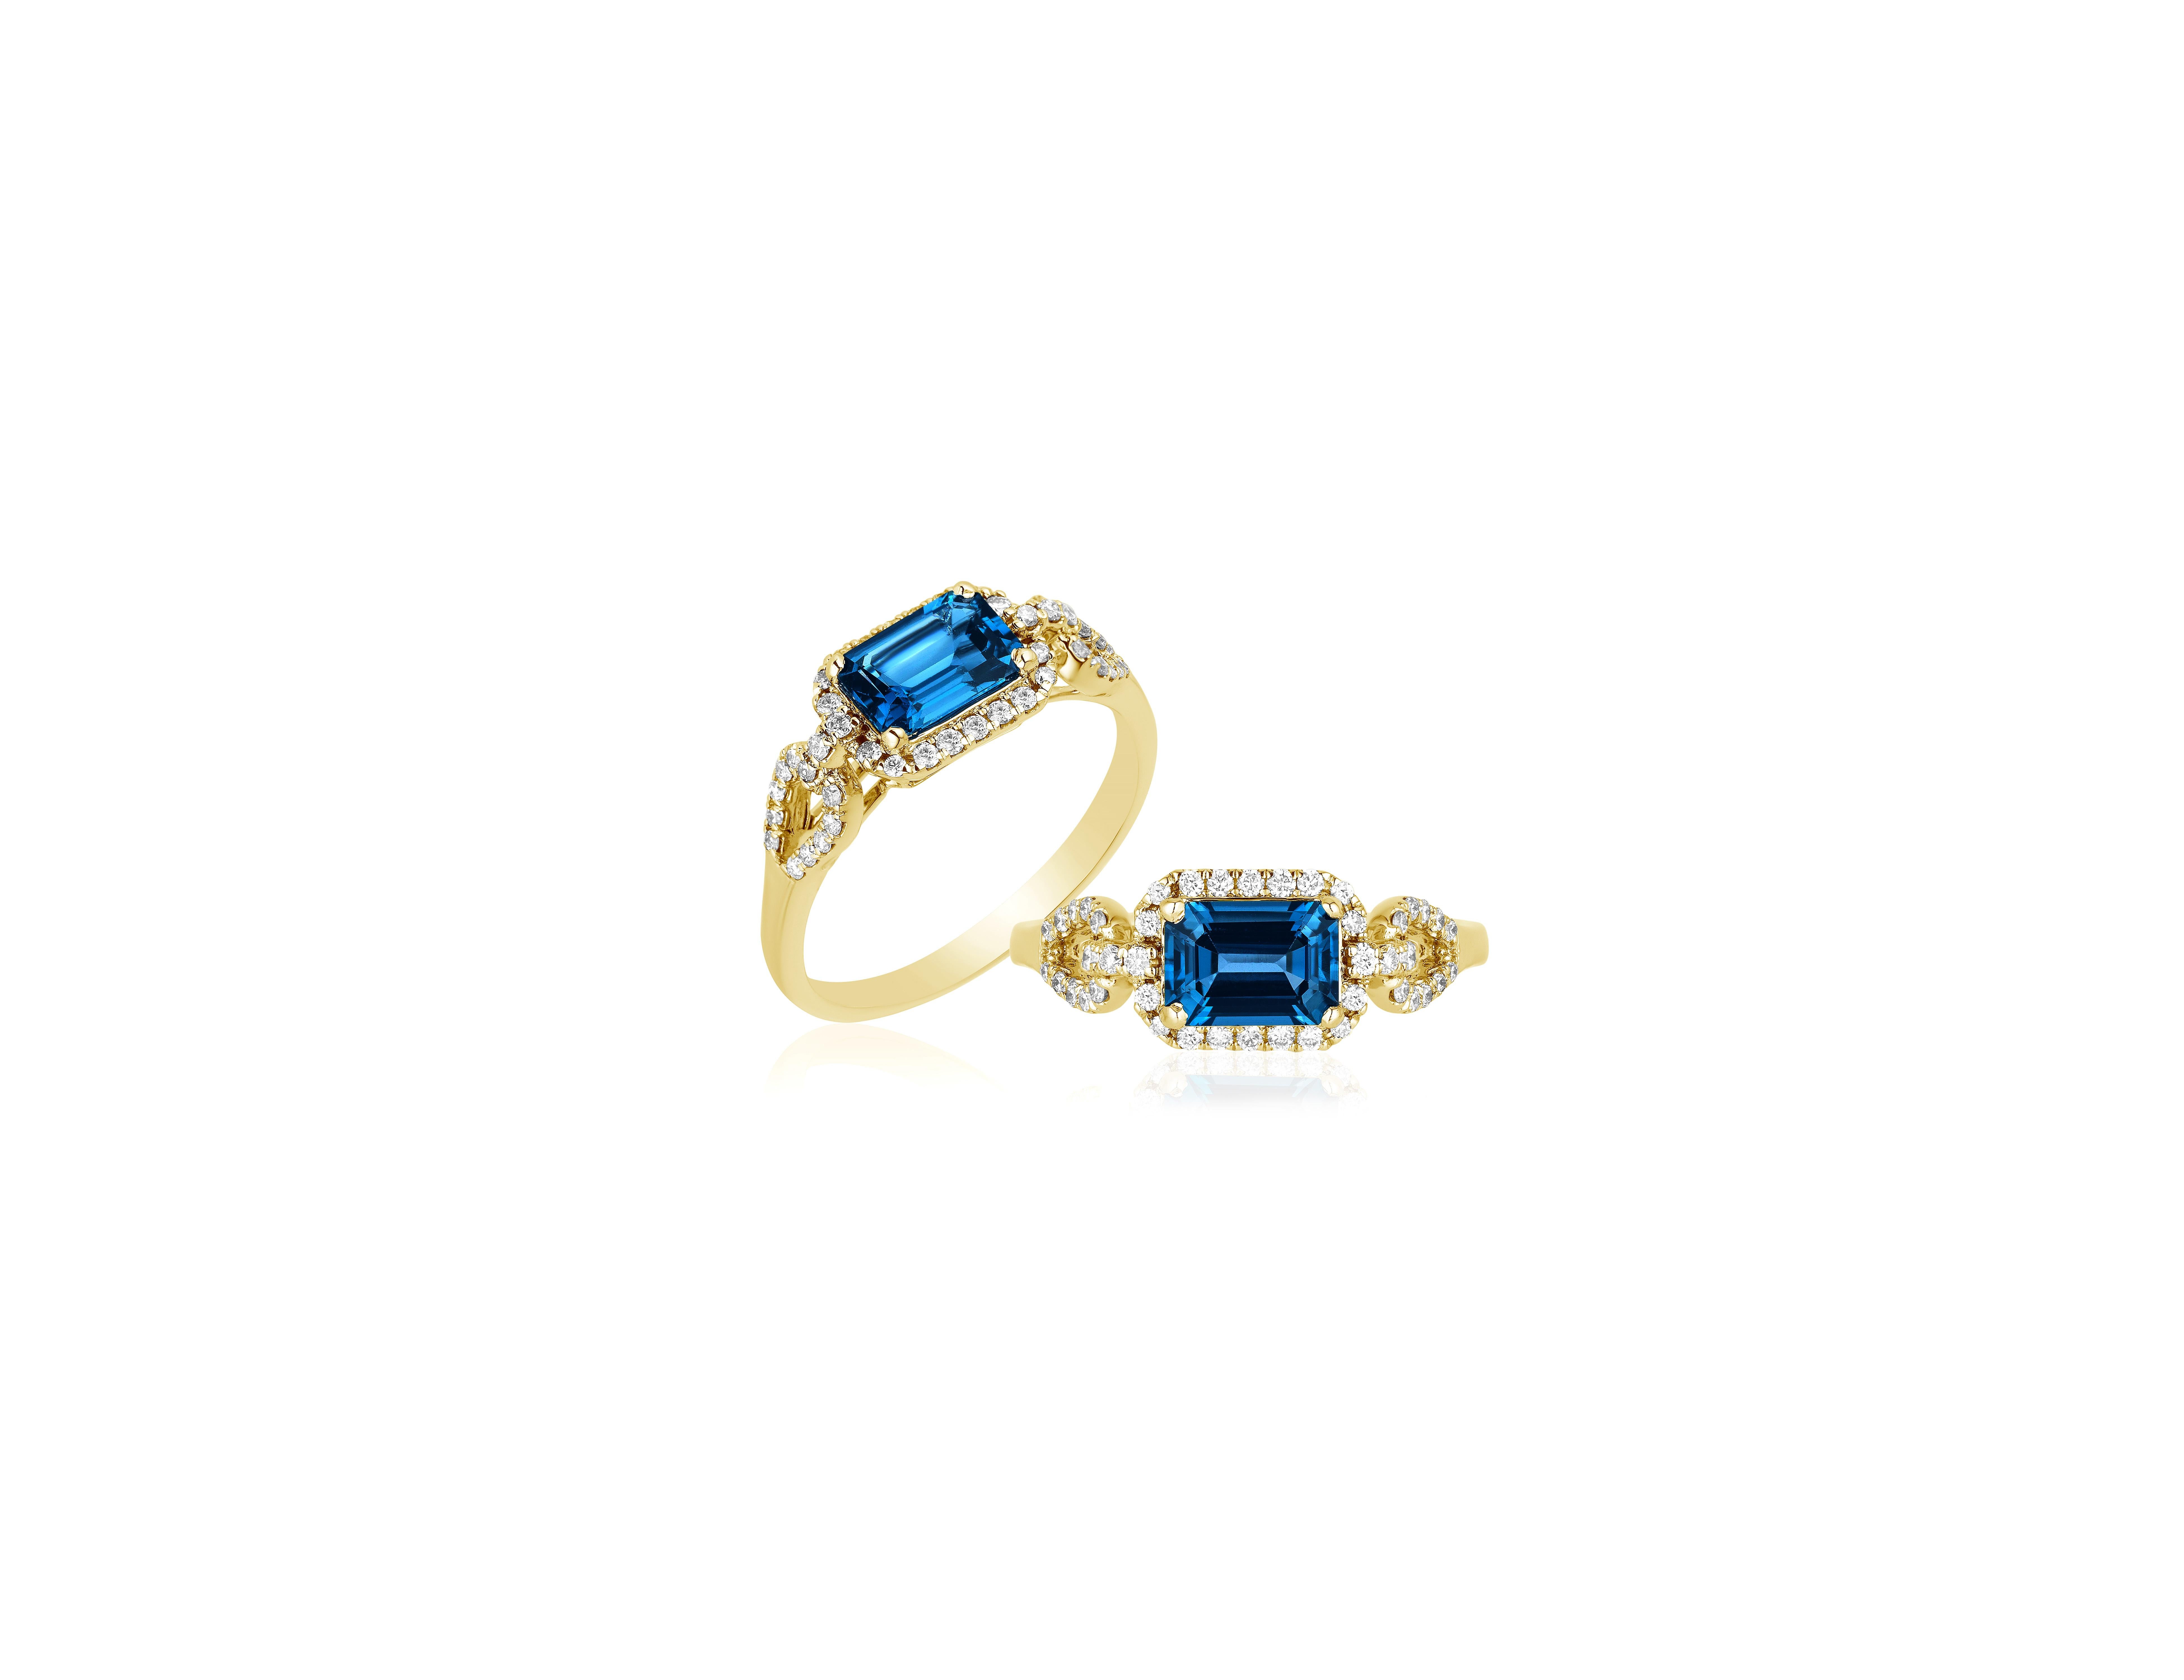 London Blue Topaz Small Emerald Cut Ring in 18K Yellow Gold from 'Gossip' Collection

Stone Size: 7 x 5 mm

Diamonds: G-H / VS, Approx Wt: 0.21 Cts